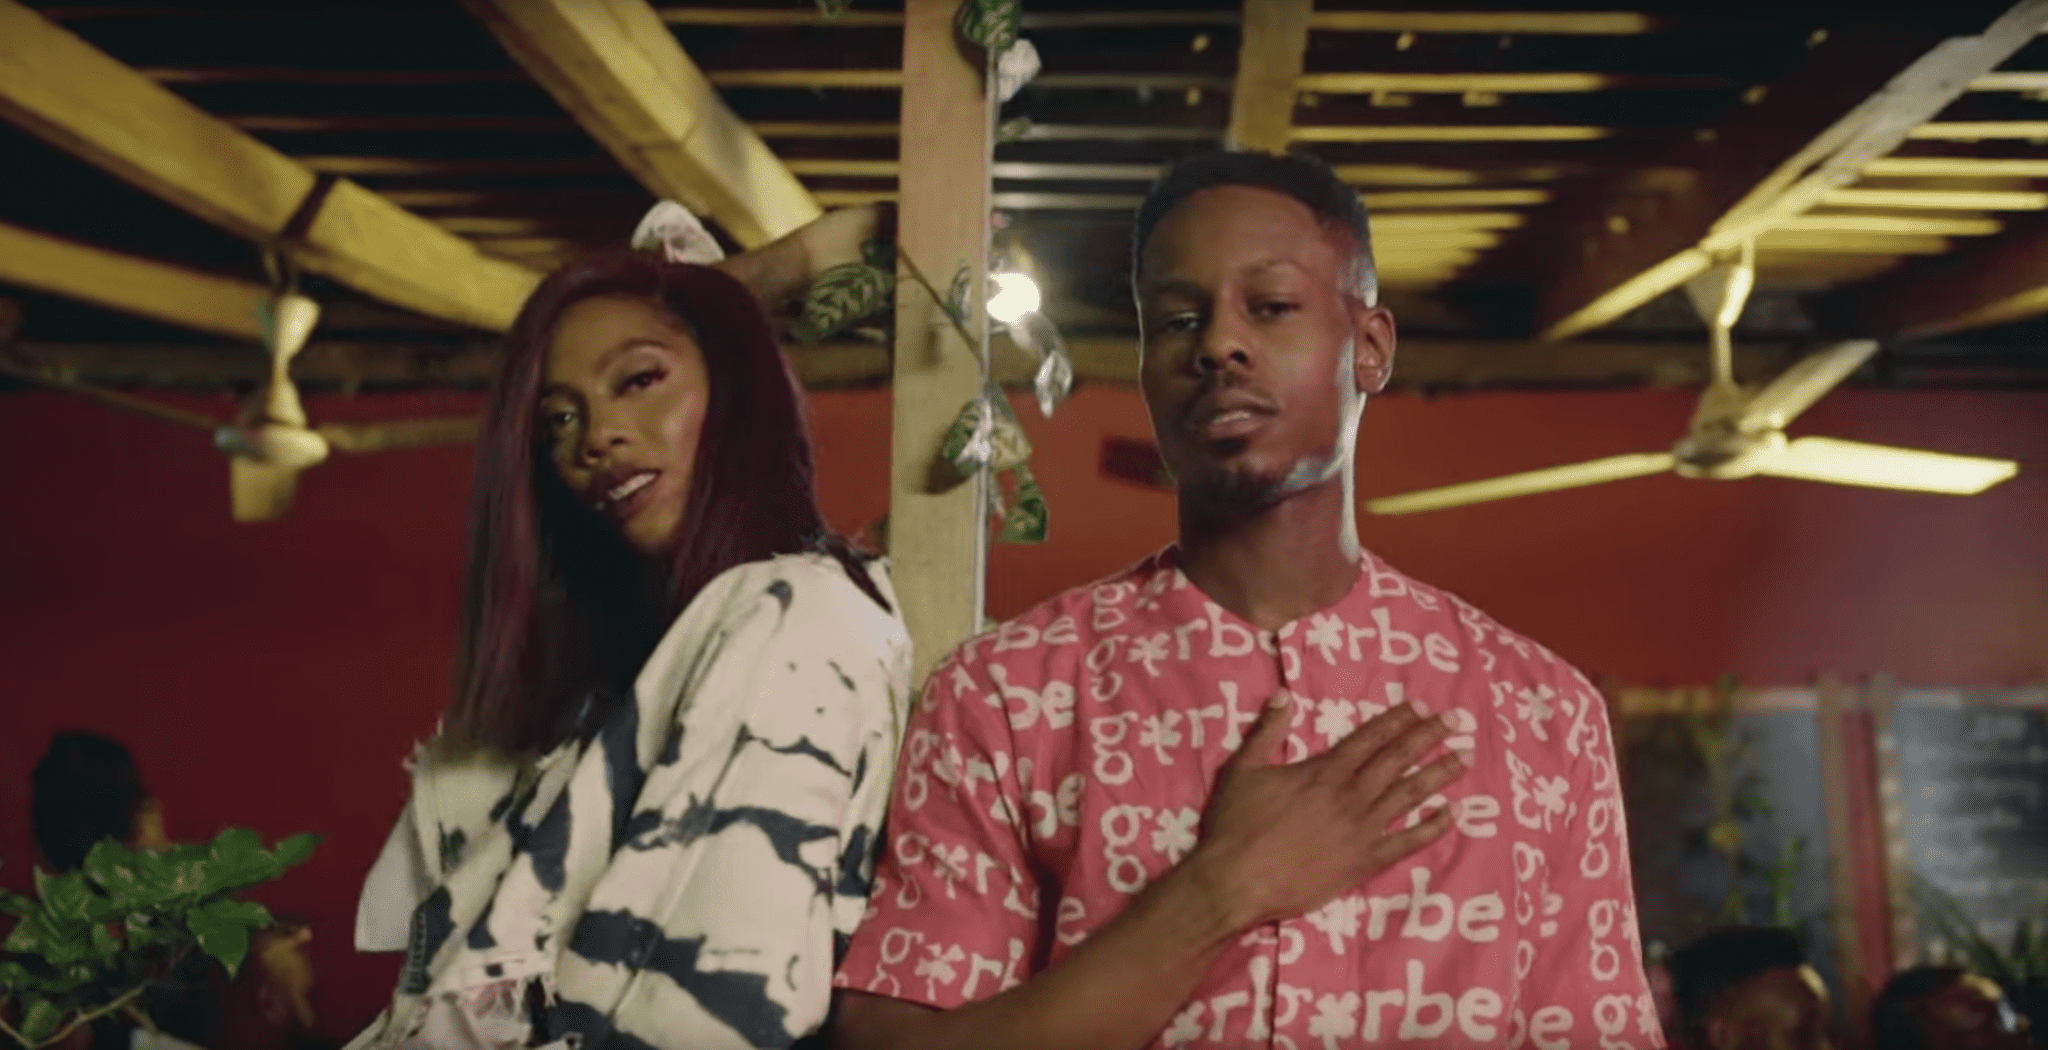 Poe and Tiwa savage set an example for consensual relationships in “Are You Down” video